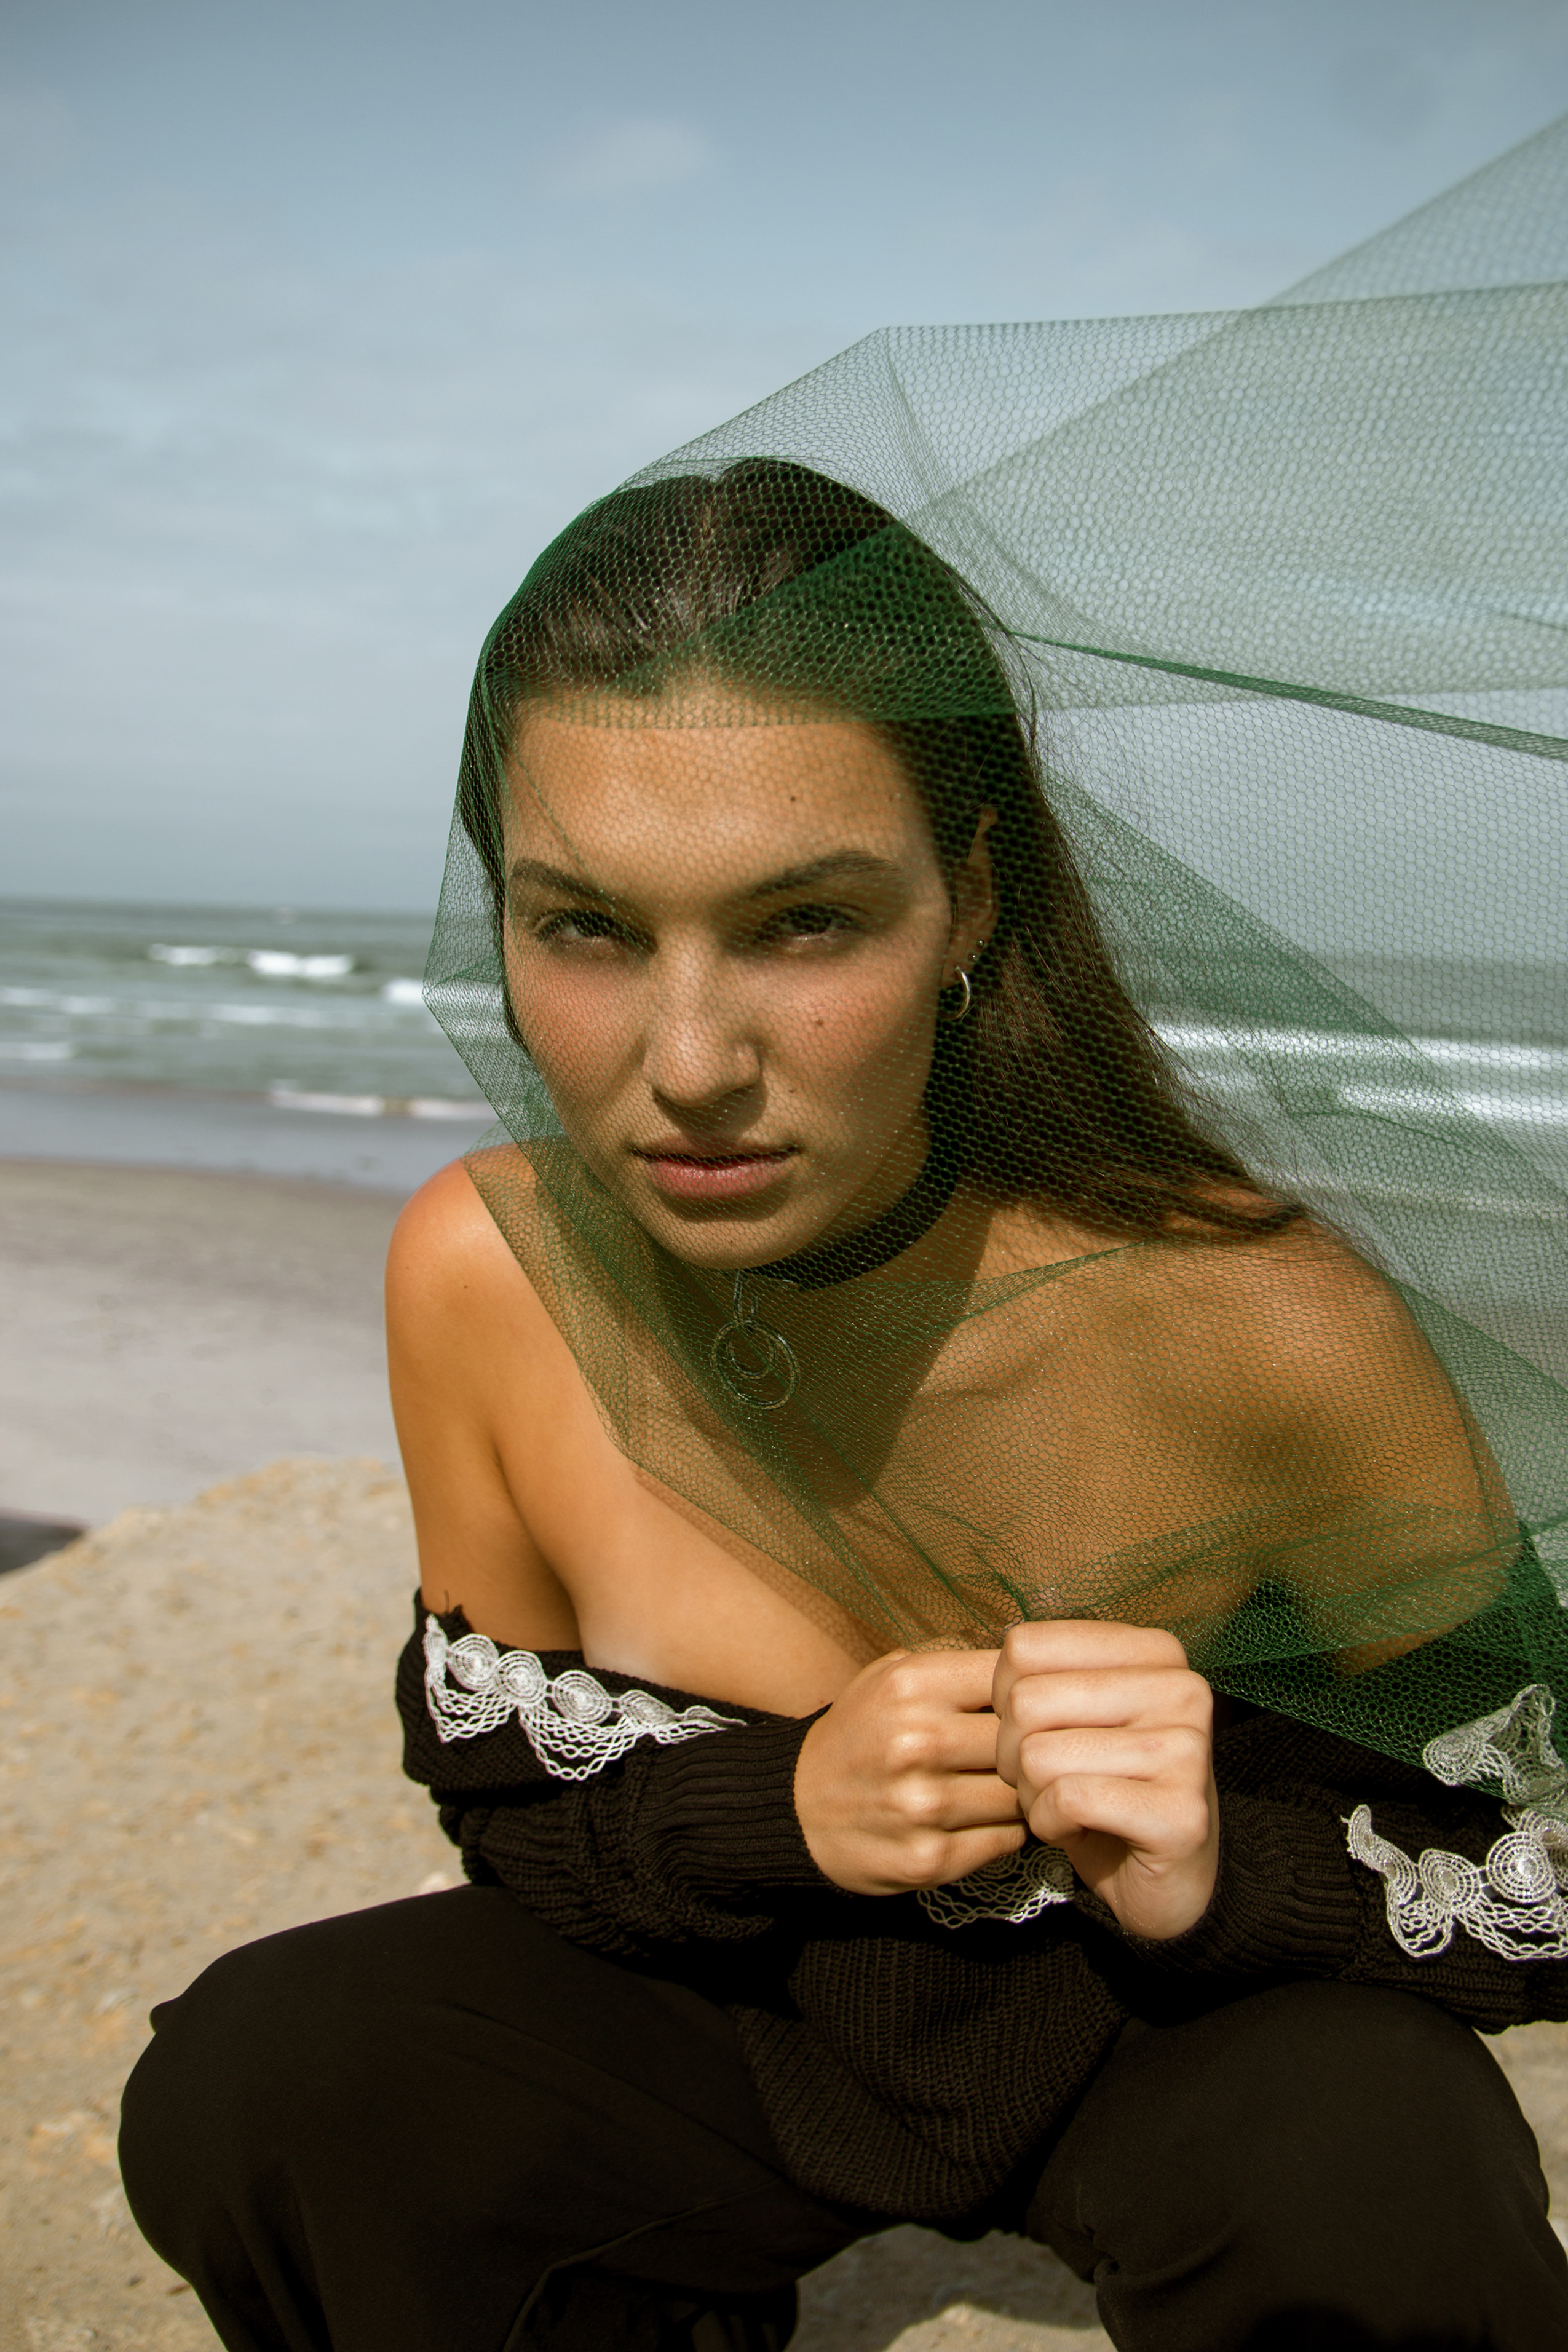 Daughter Of The Sea - Editorial by Caitlyn Gaurano